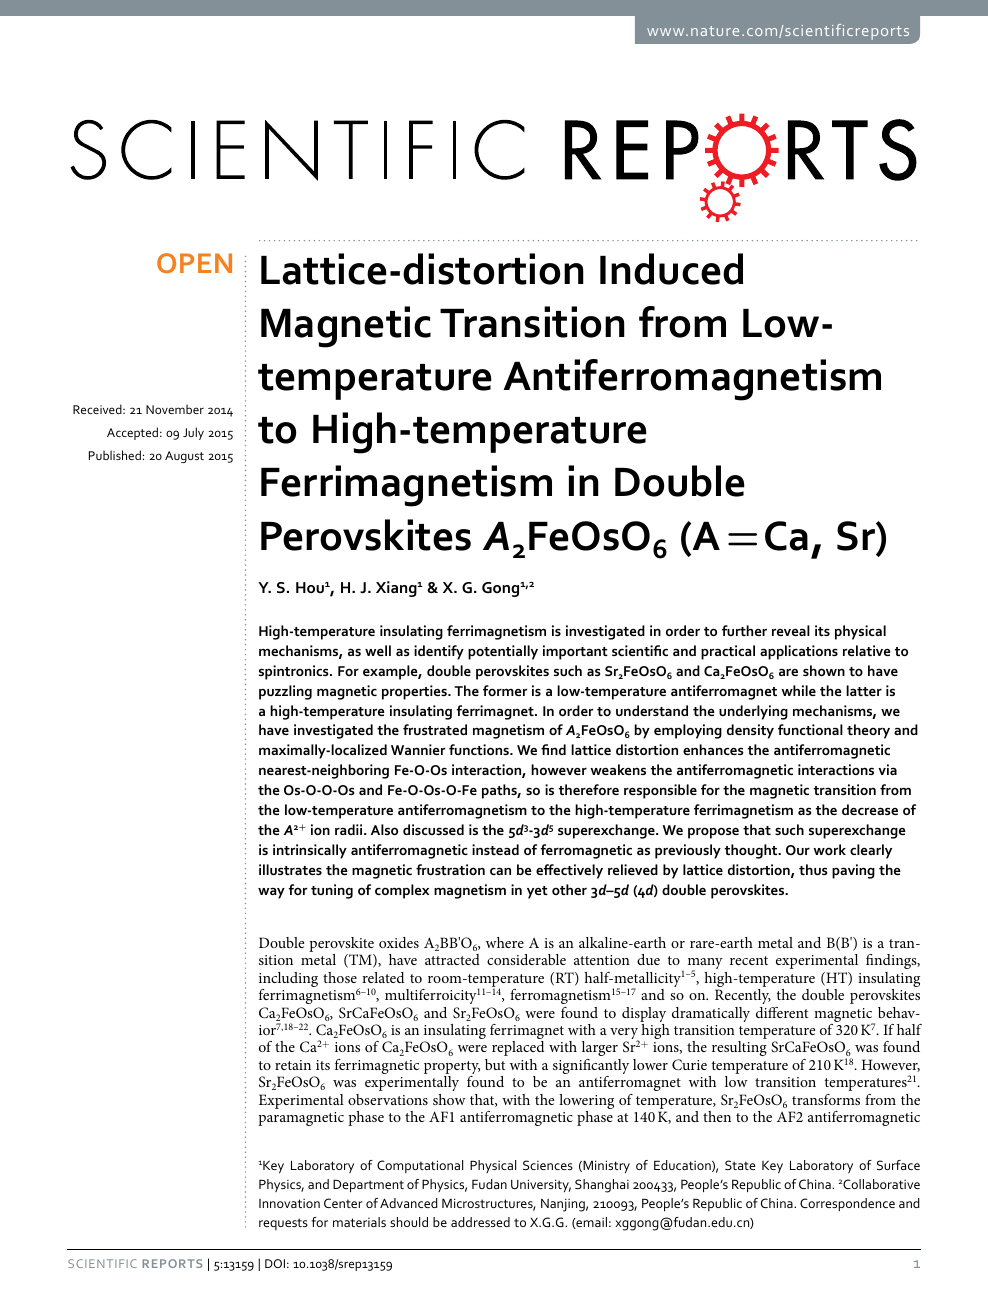 Lattice Distortion Induced Magnetic Transition From Low Temperature Antiferromagnetism To High Temperature Ferrimagnetism In Double Perovskites feoso6 A Ca Sr Topic Of Research Paper In Nano Technology Download Scholarly Article Pdf And Read For